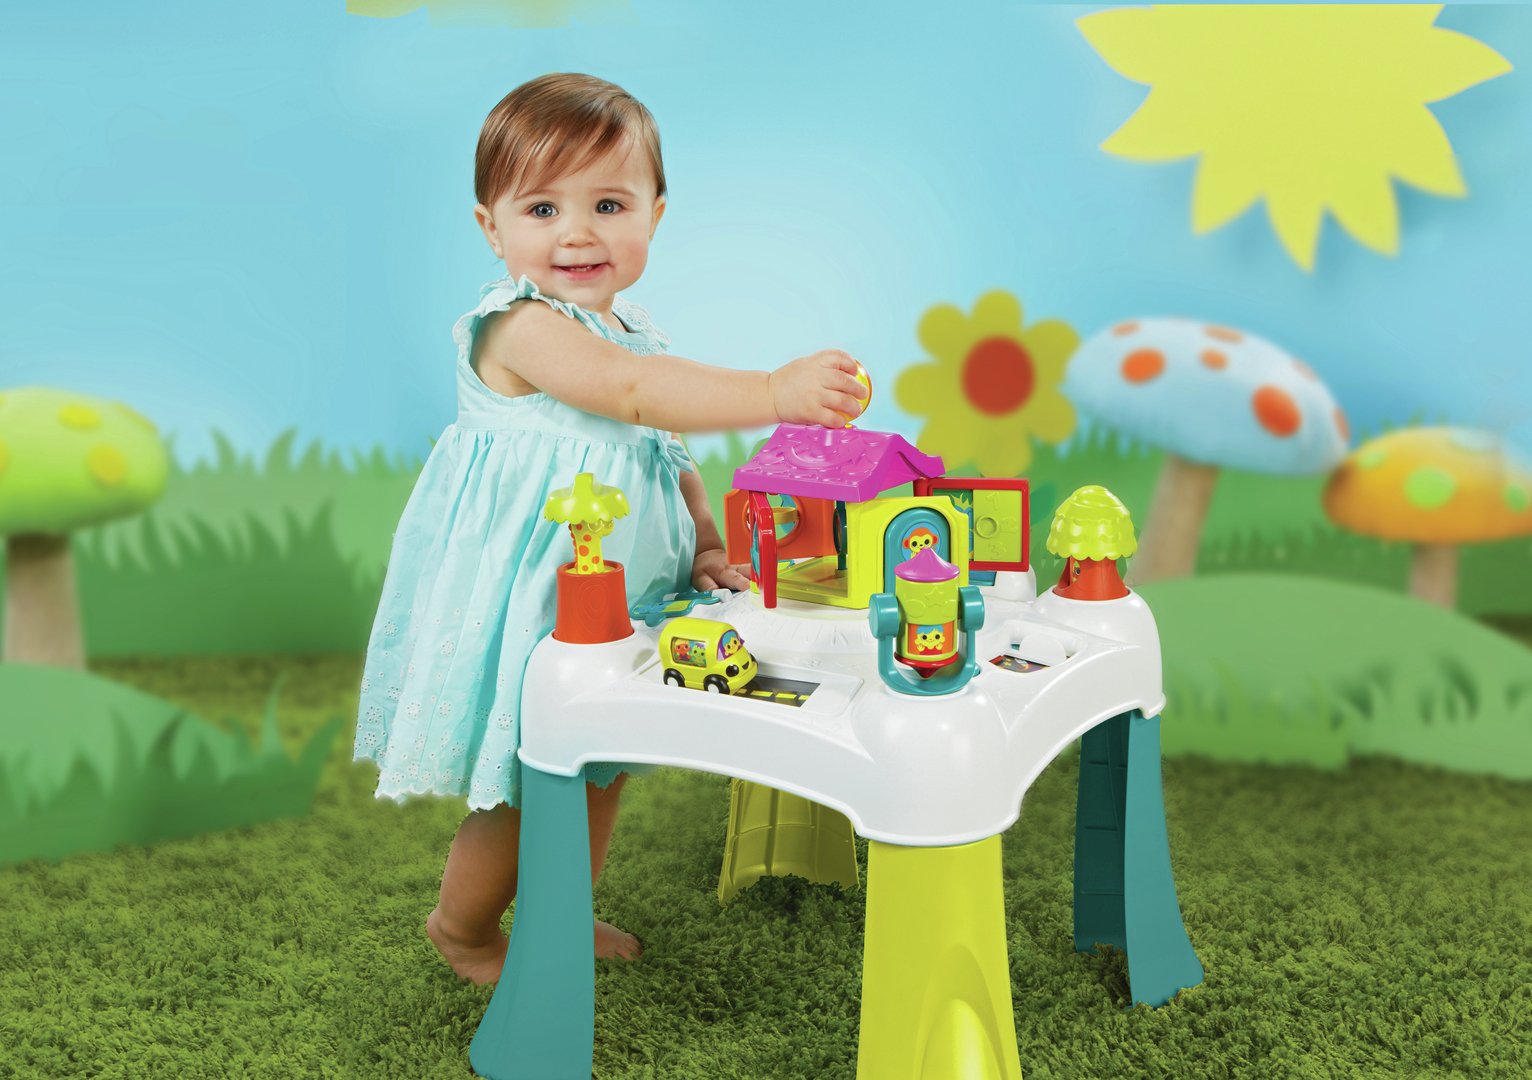 Little Tikes Switcharoo 3-in-1 Activity Table